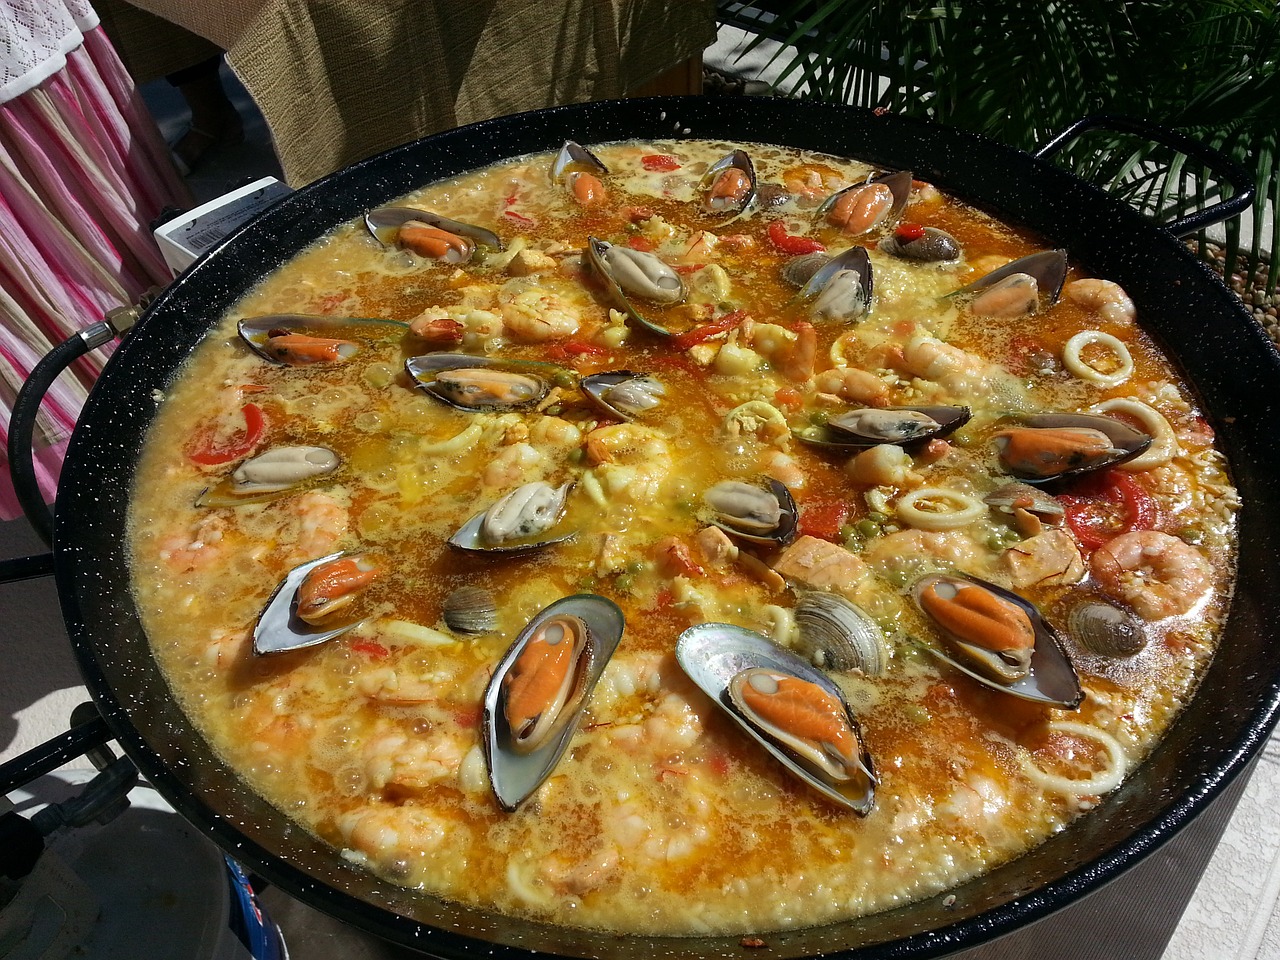 Spanish Paella (with Chicken and Seafood)